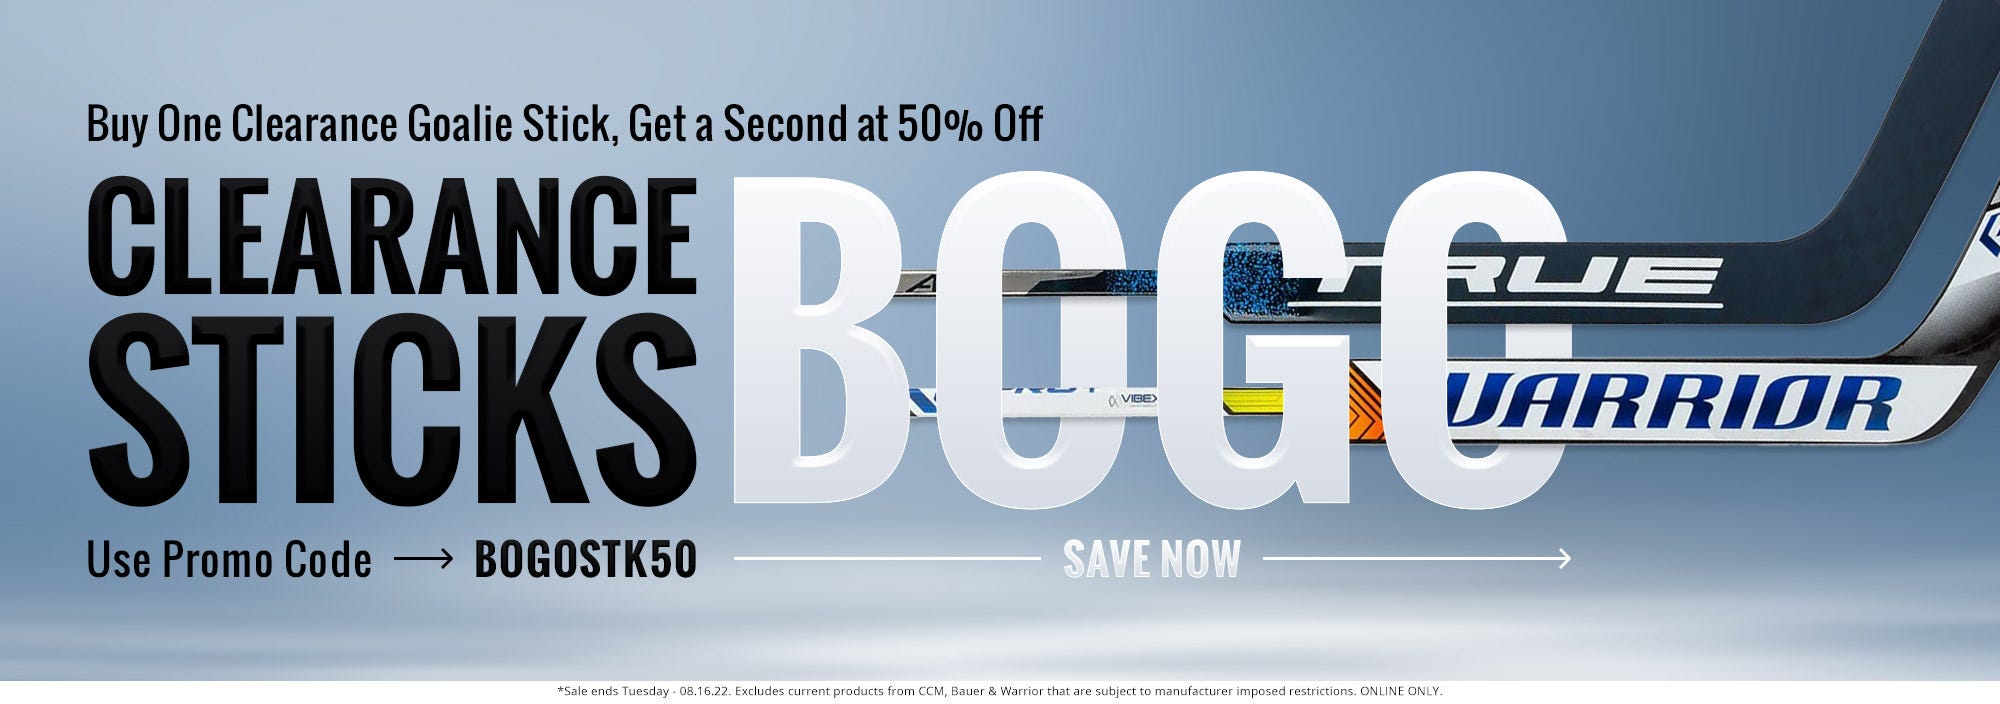 Goalie Stick Sale - Buy One, Get One 50% Off